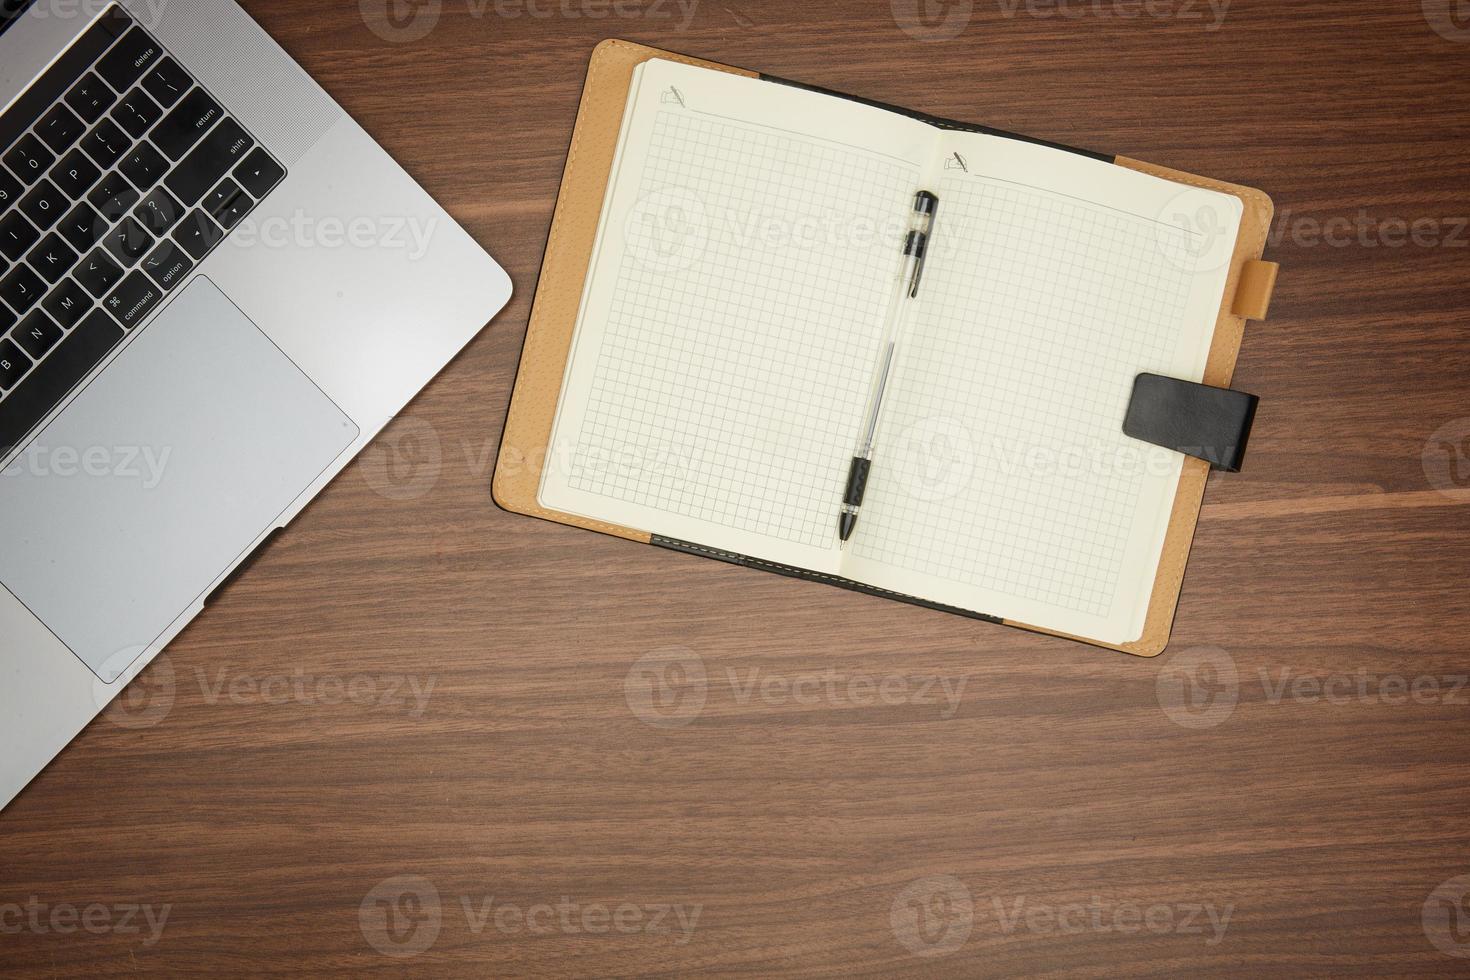 laptop, notepad on wooden table office concept, stationery, flat lay photo